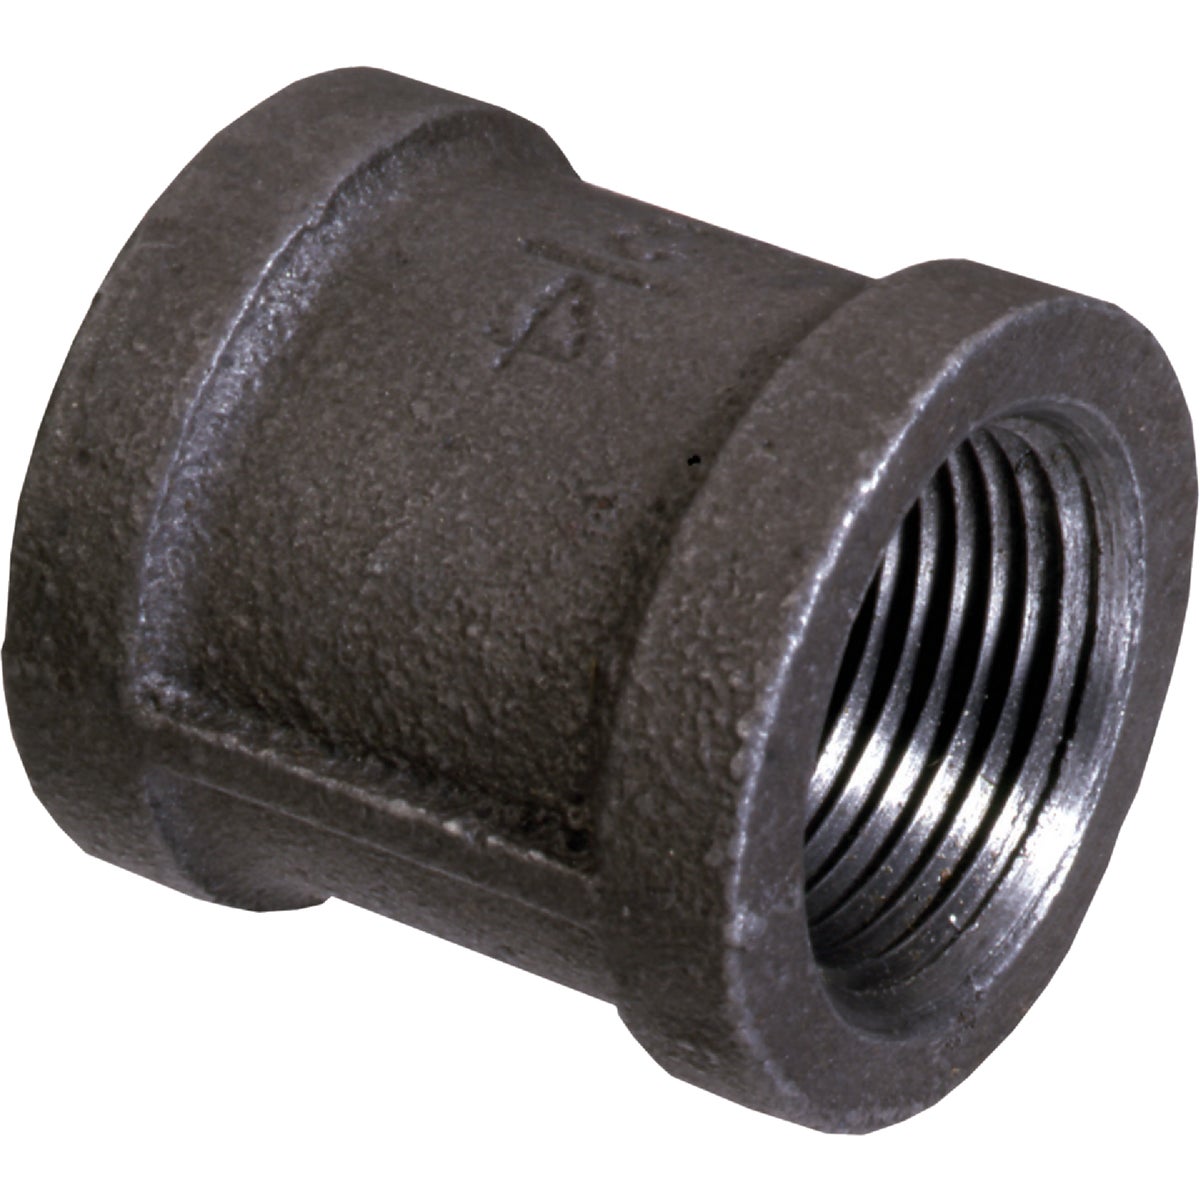 Item 472689, Malleable black iron pipe fittings.